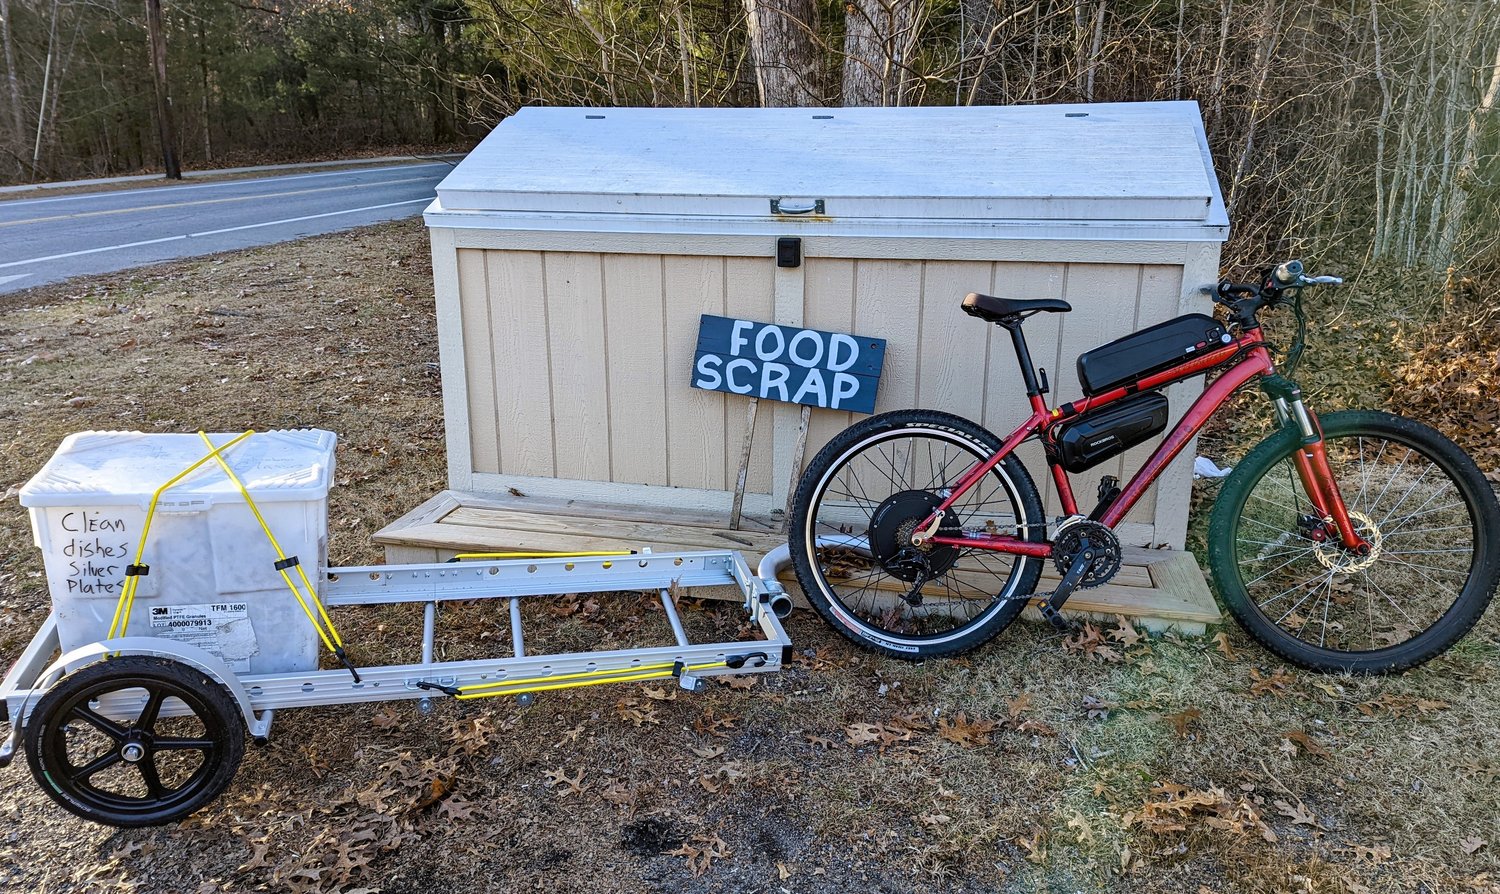 Barrington Farm School volunteers transport the donated food scraps from the Kent Street collection bin to the farm school property using an electric bicycle and trailer.